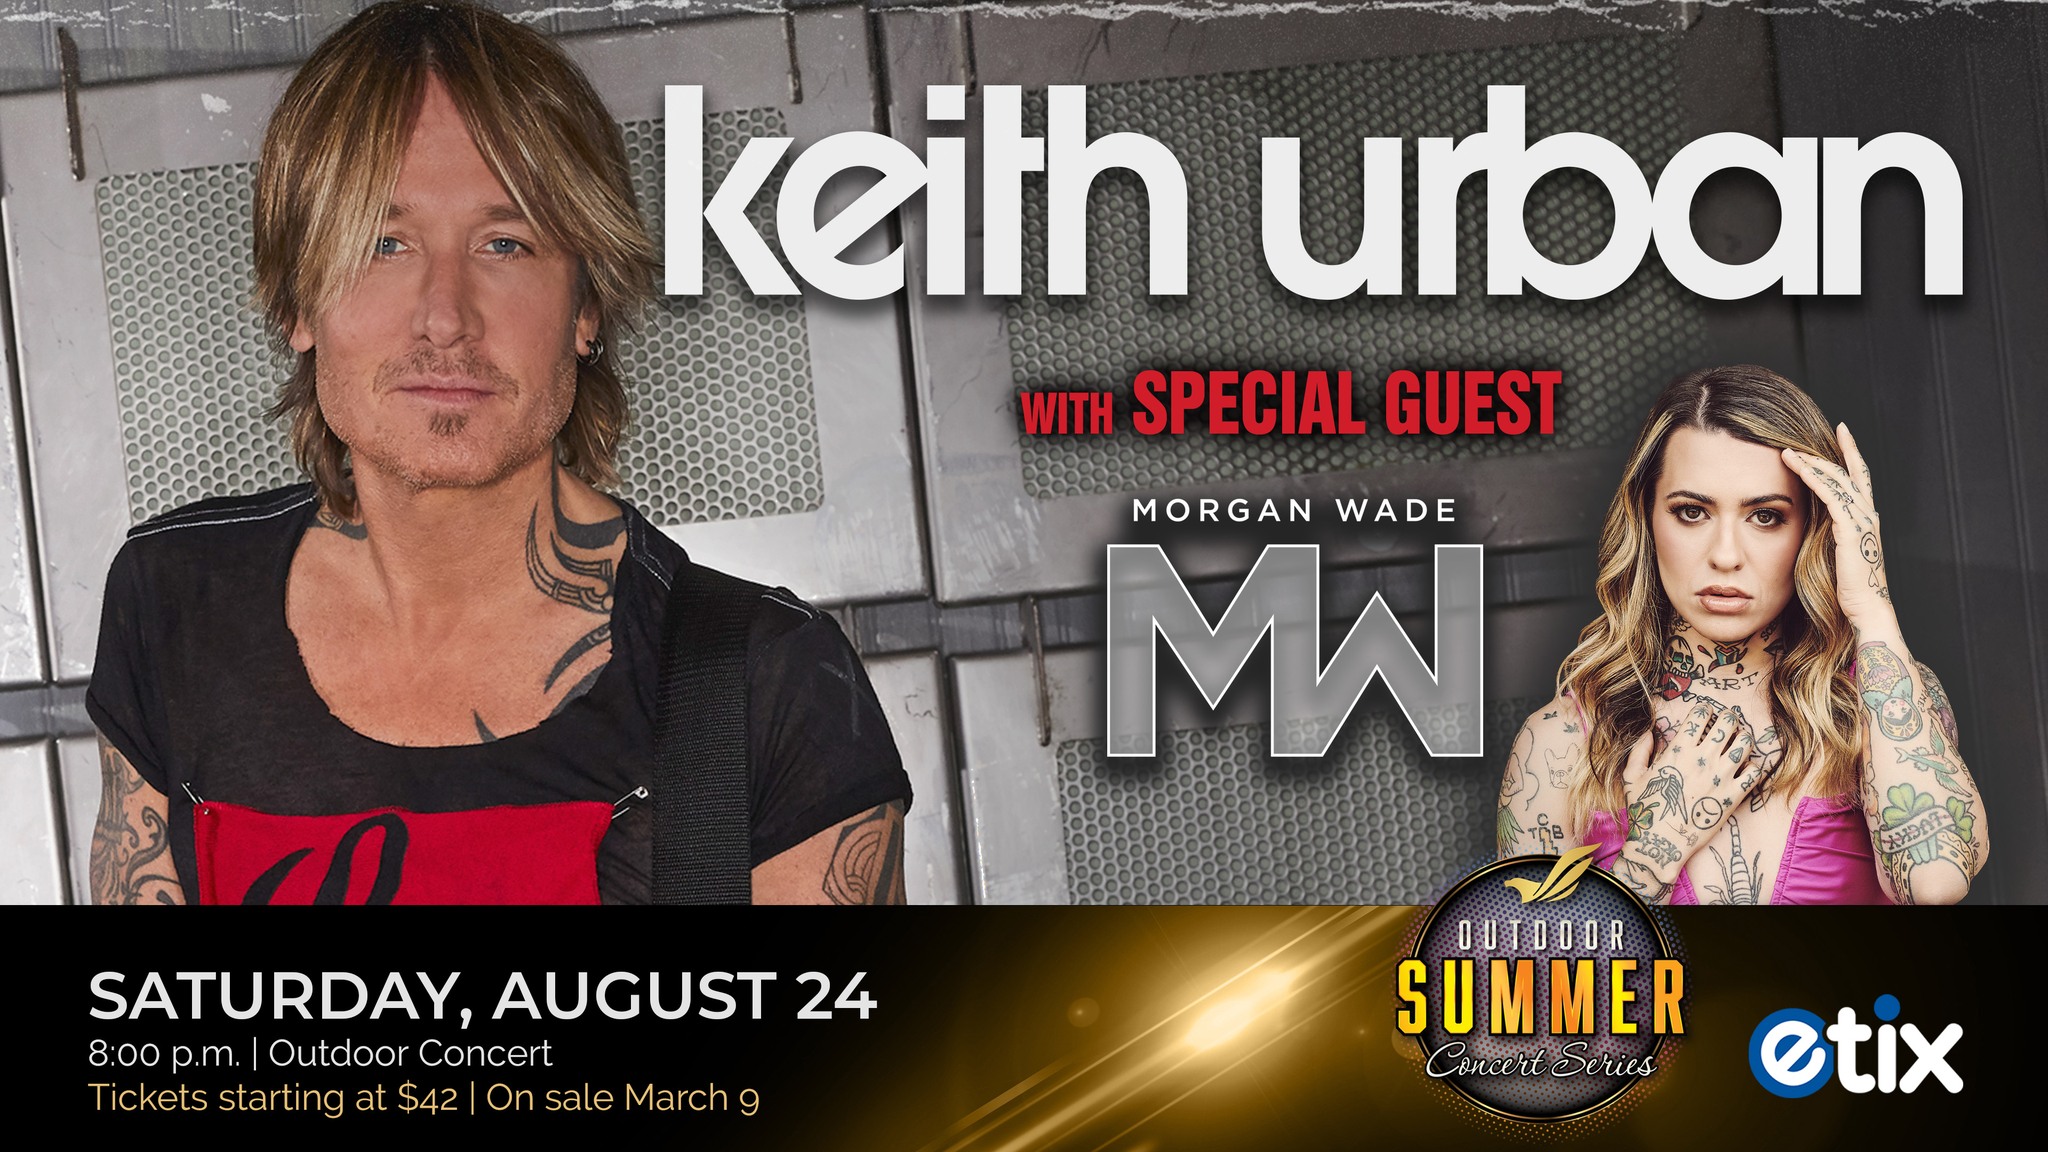 KEITH URBAN COUNTRY SINGER